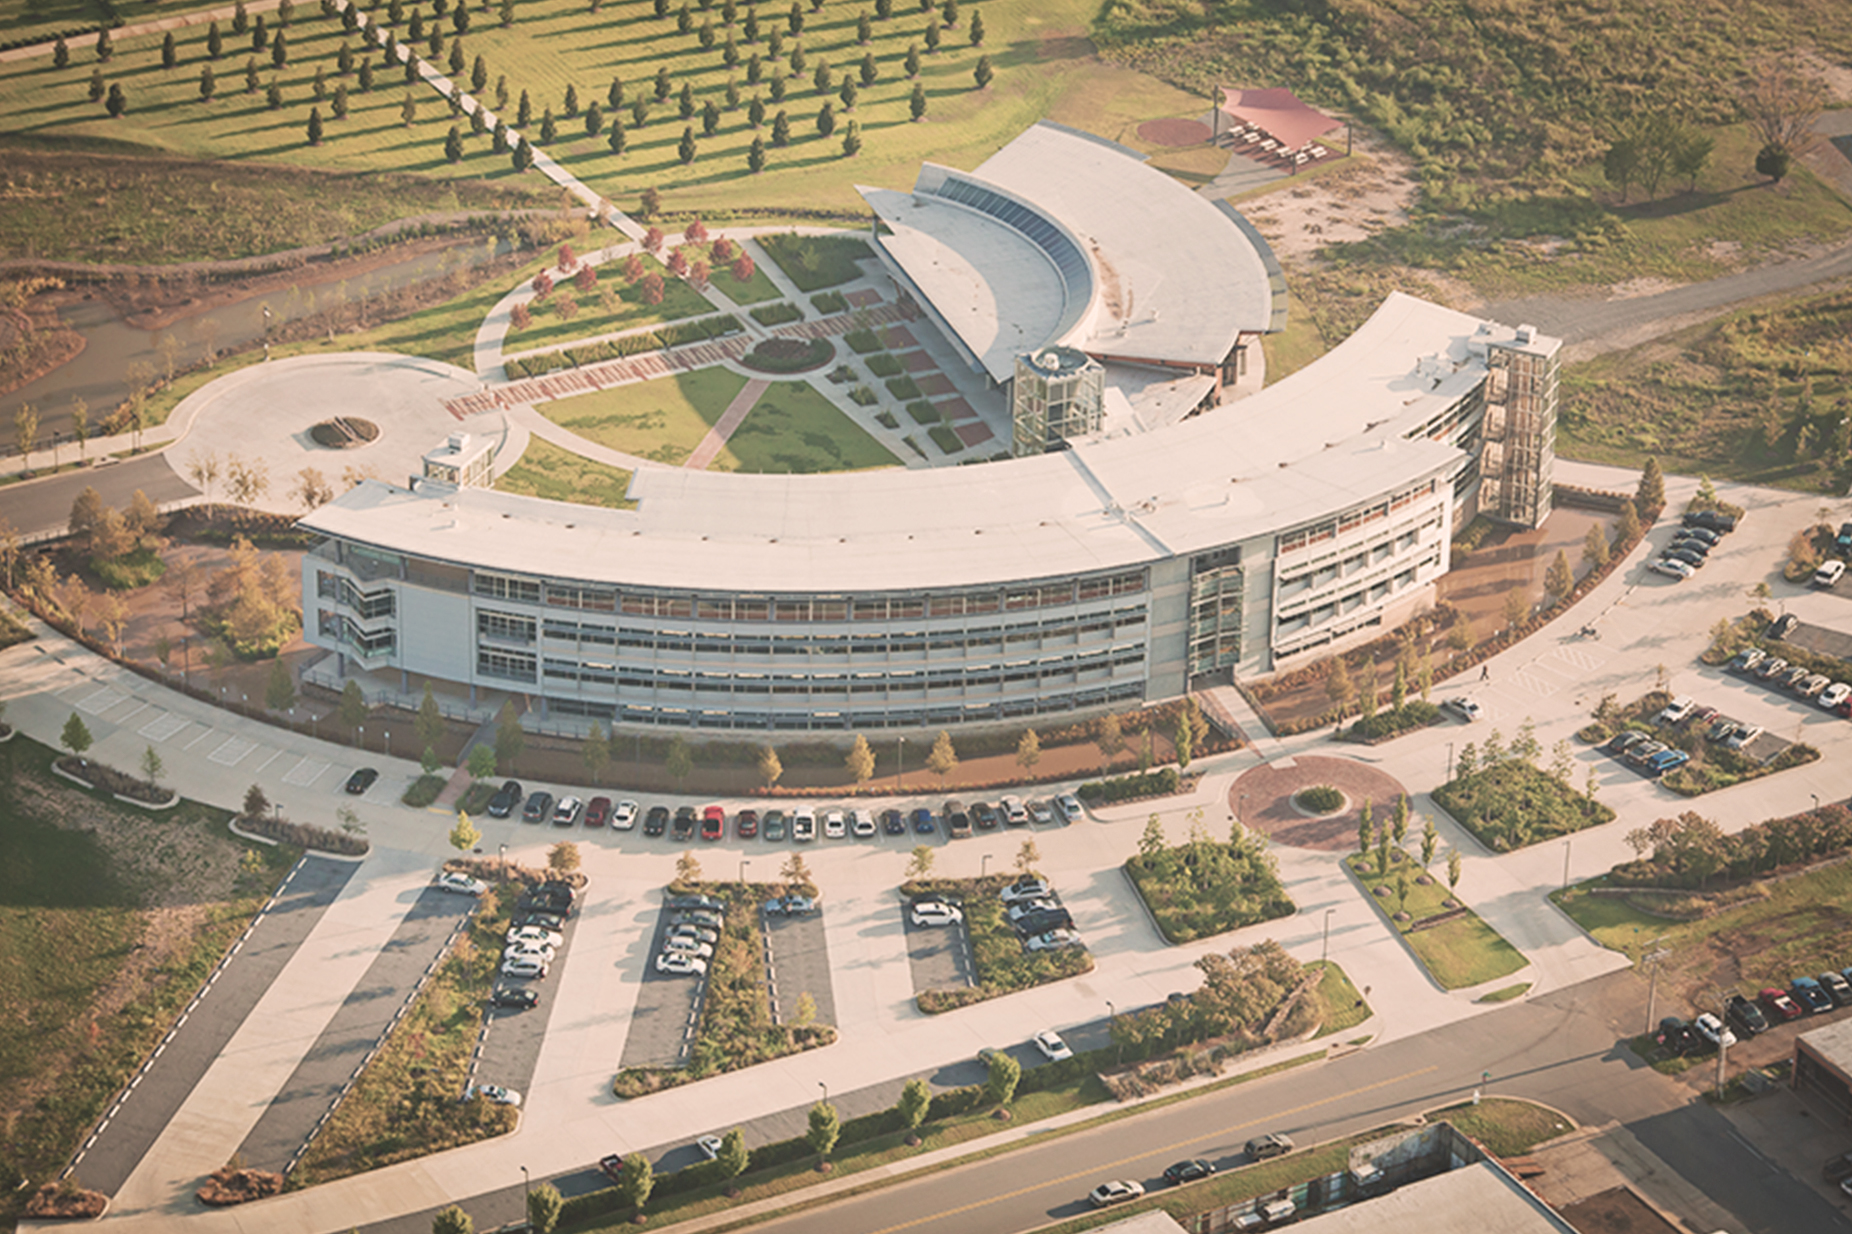 The aerial view of Heifer Headquarters shows how the building is constructed as two crescents, a large one with the main entrance on its bowed side and a smaller one jutting just off the inside of the larger one. The building is surrounded by wetlands with a parking lot out front. 